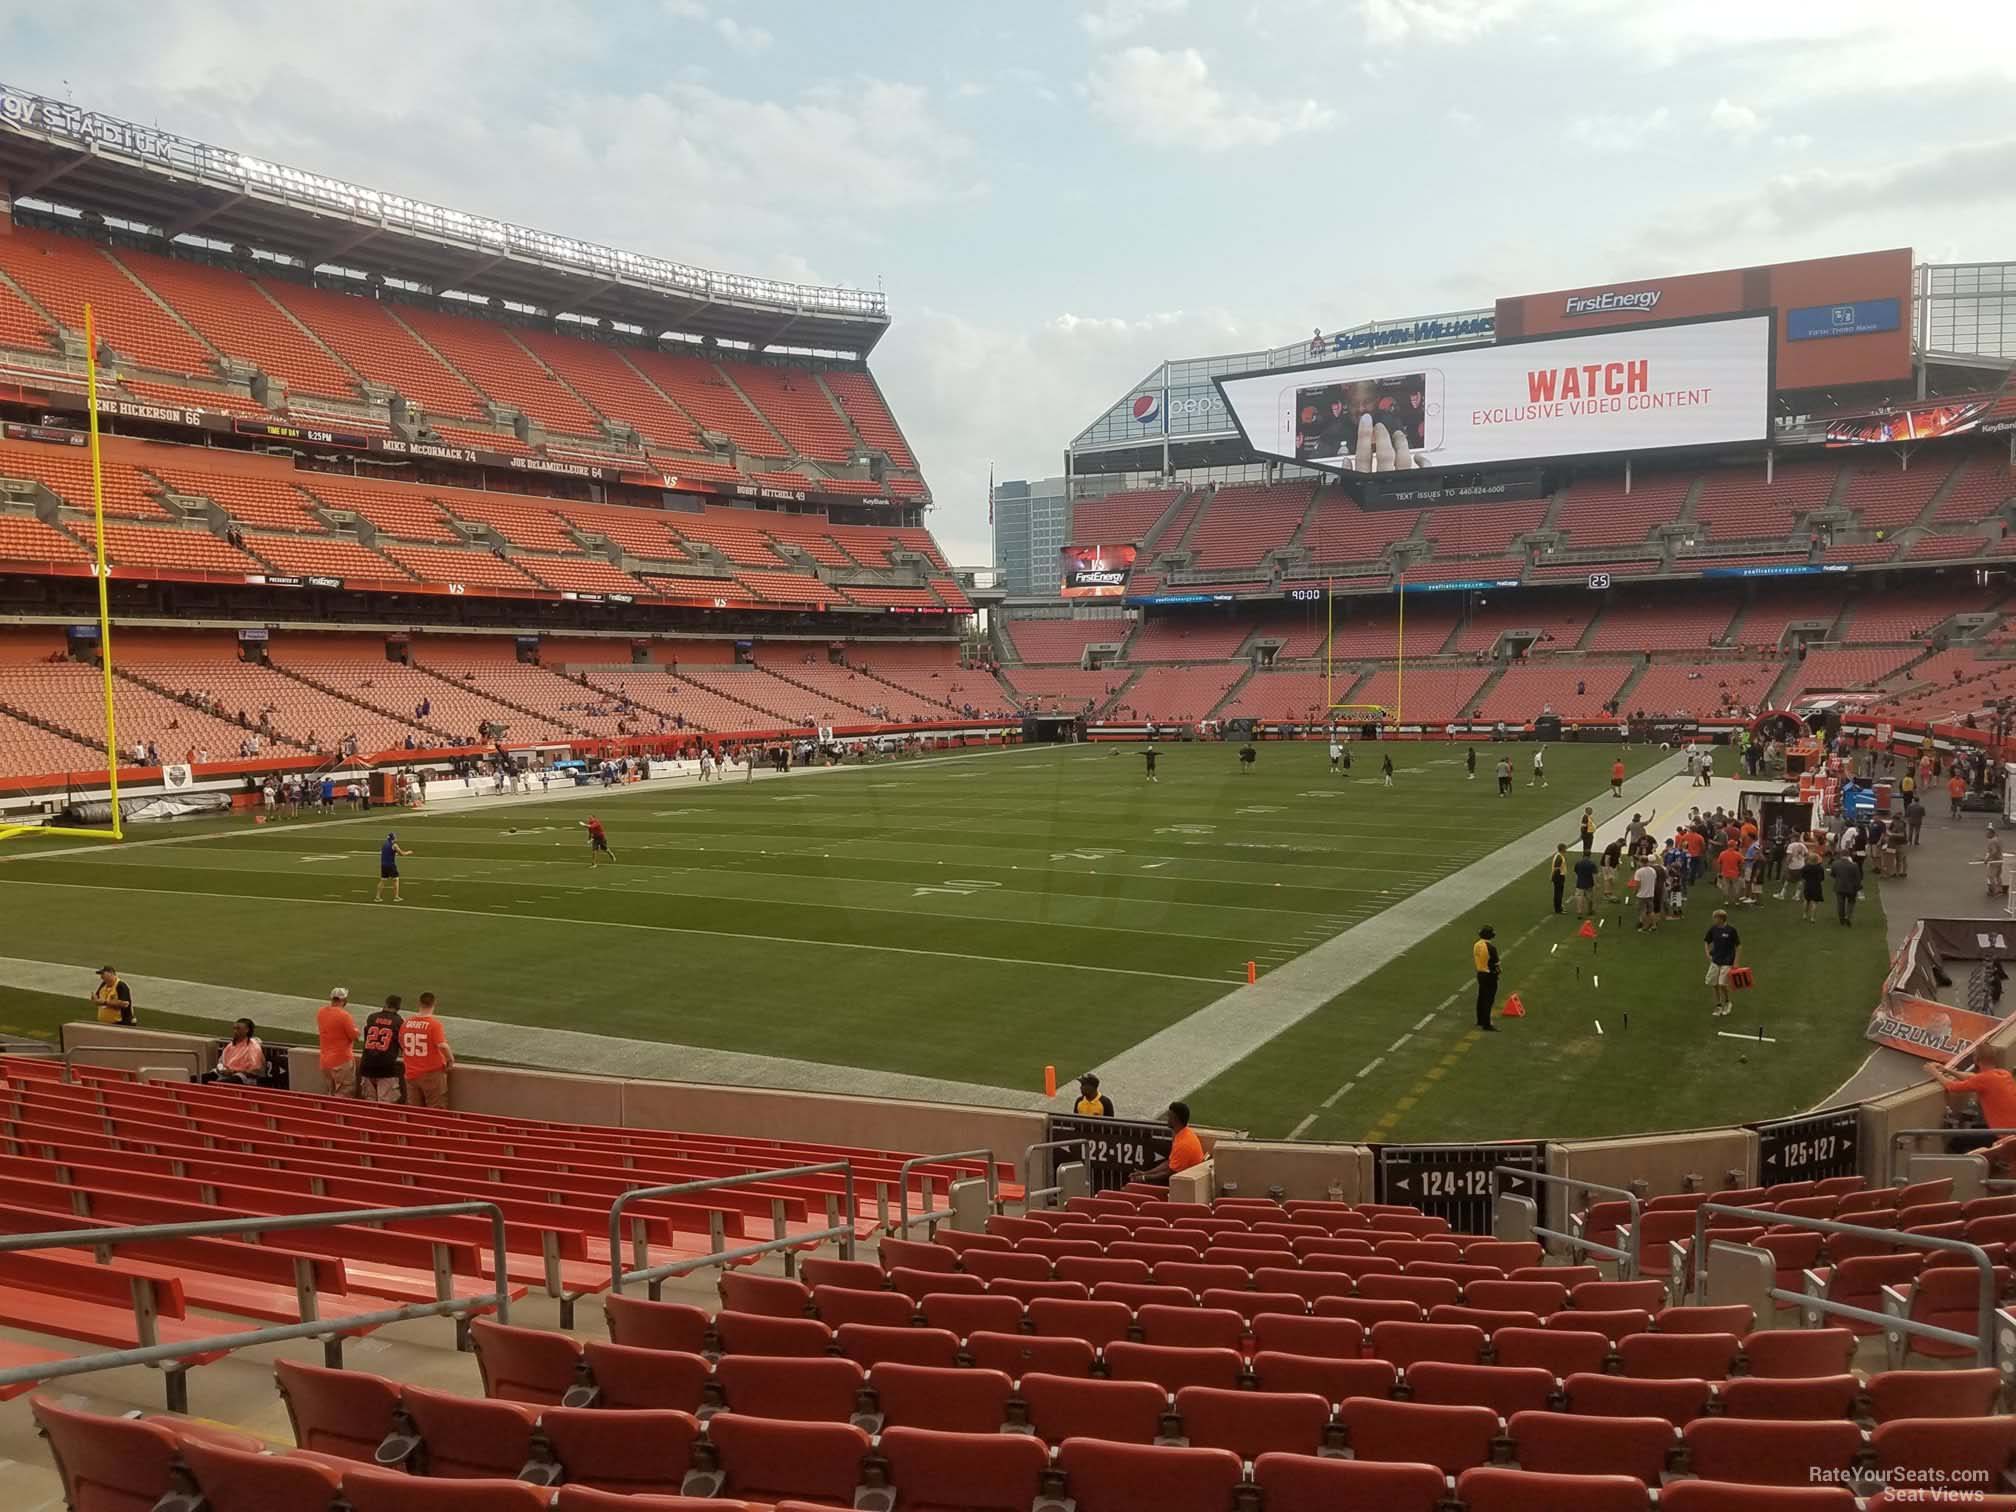 section 124, row 17 seat view  - cleveland browns stadium